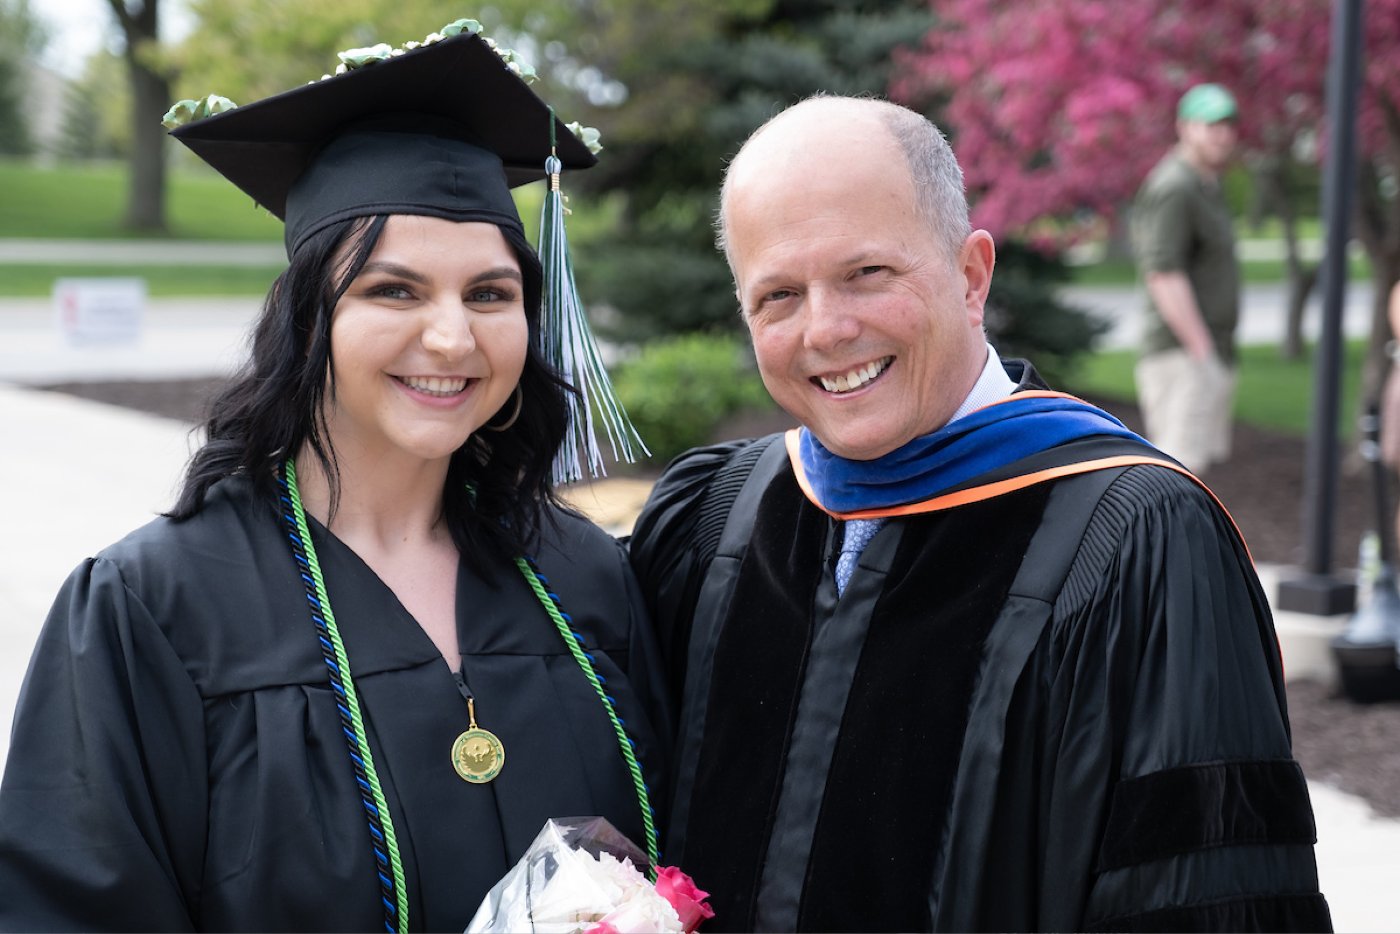 A faculty members poses with a graduated student outdoors after the commencement ceremony